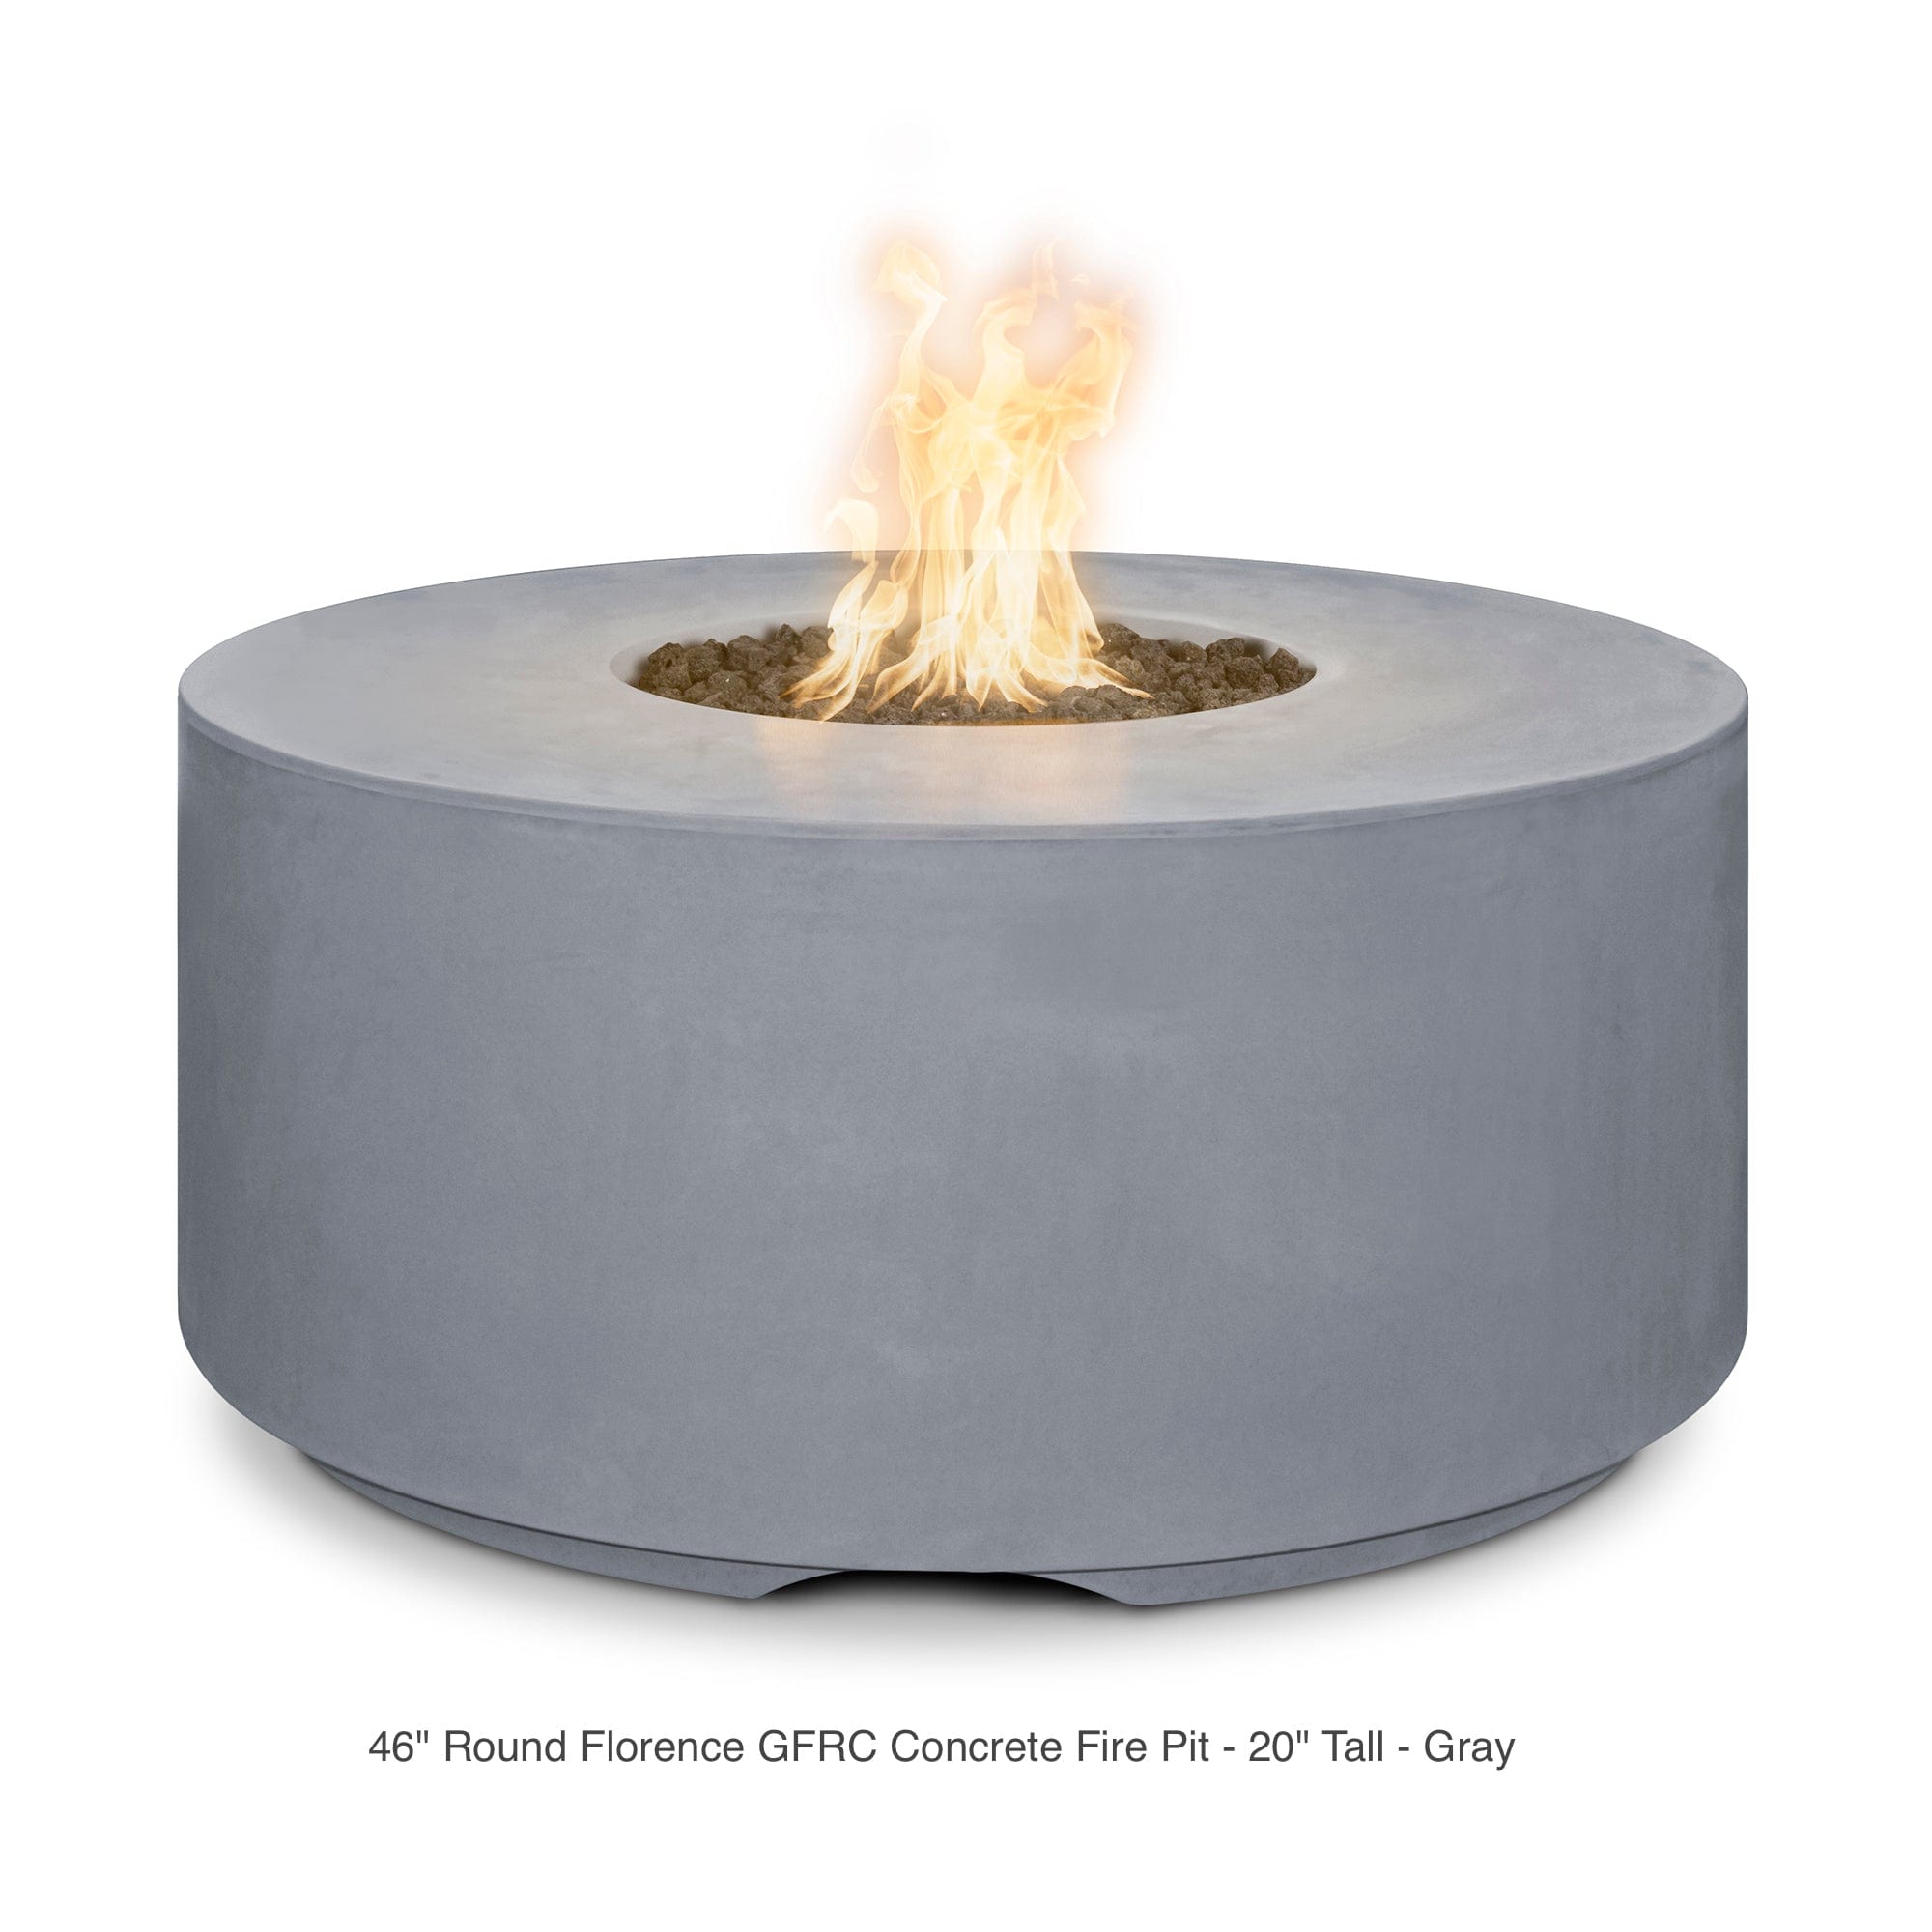 The Outdoor Plus Fire Features The Outdoor Plus 46", 54", 72" Round Florence GFRC Concrete Fire Pit - 20" Tall / OPT-FL4620, OPT-FL54, OPT-FL72